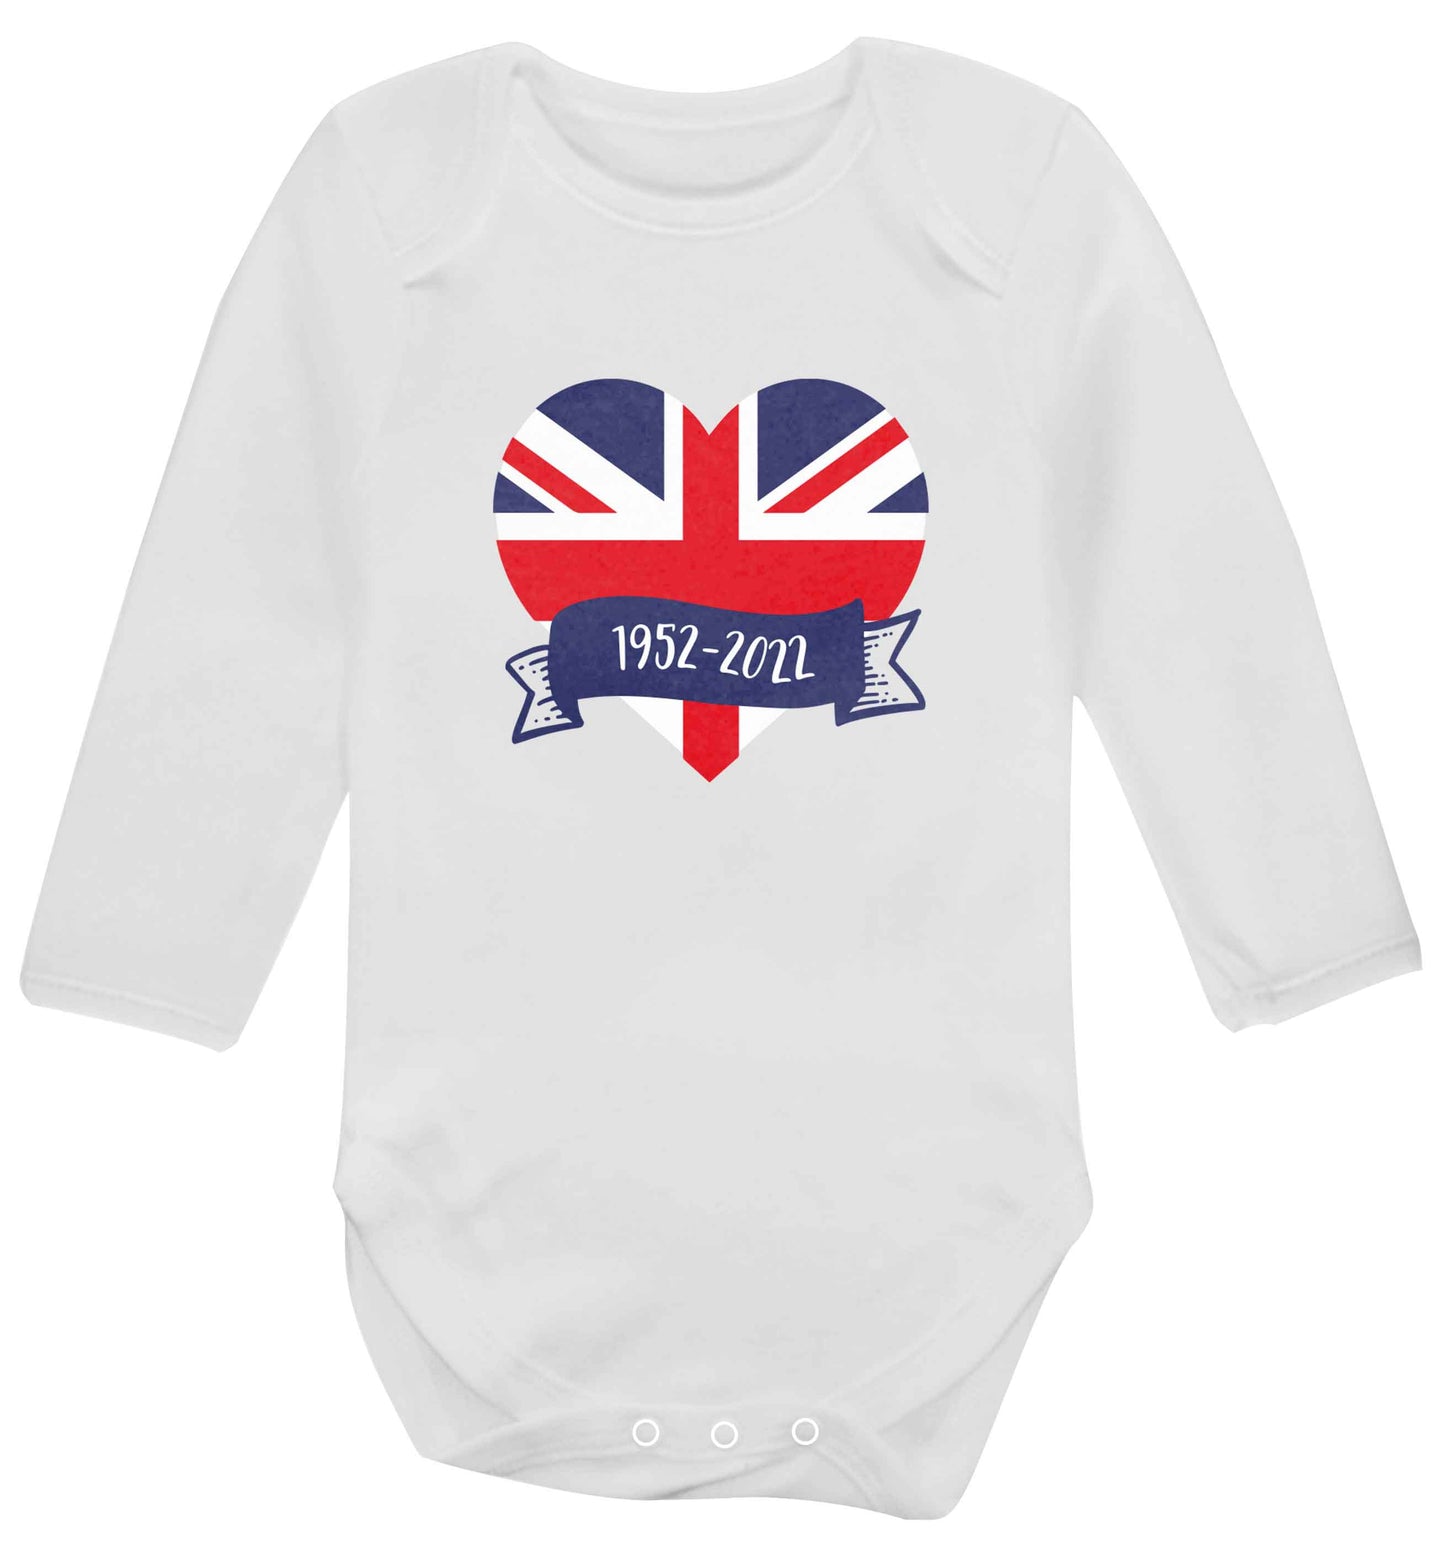 British flag heart Queens jubilee baby vest long sleeved white 6-12 months